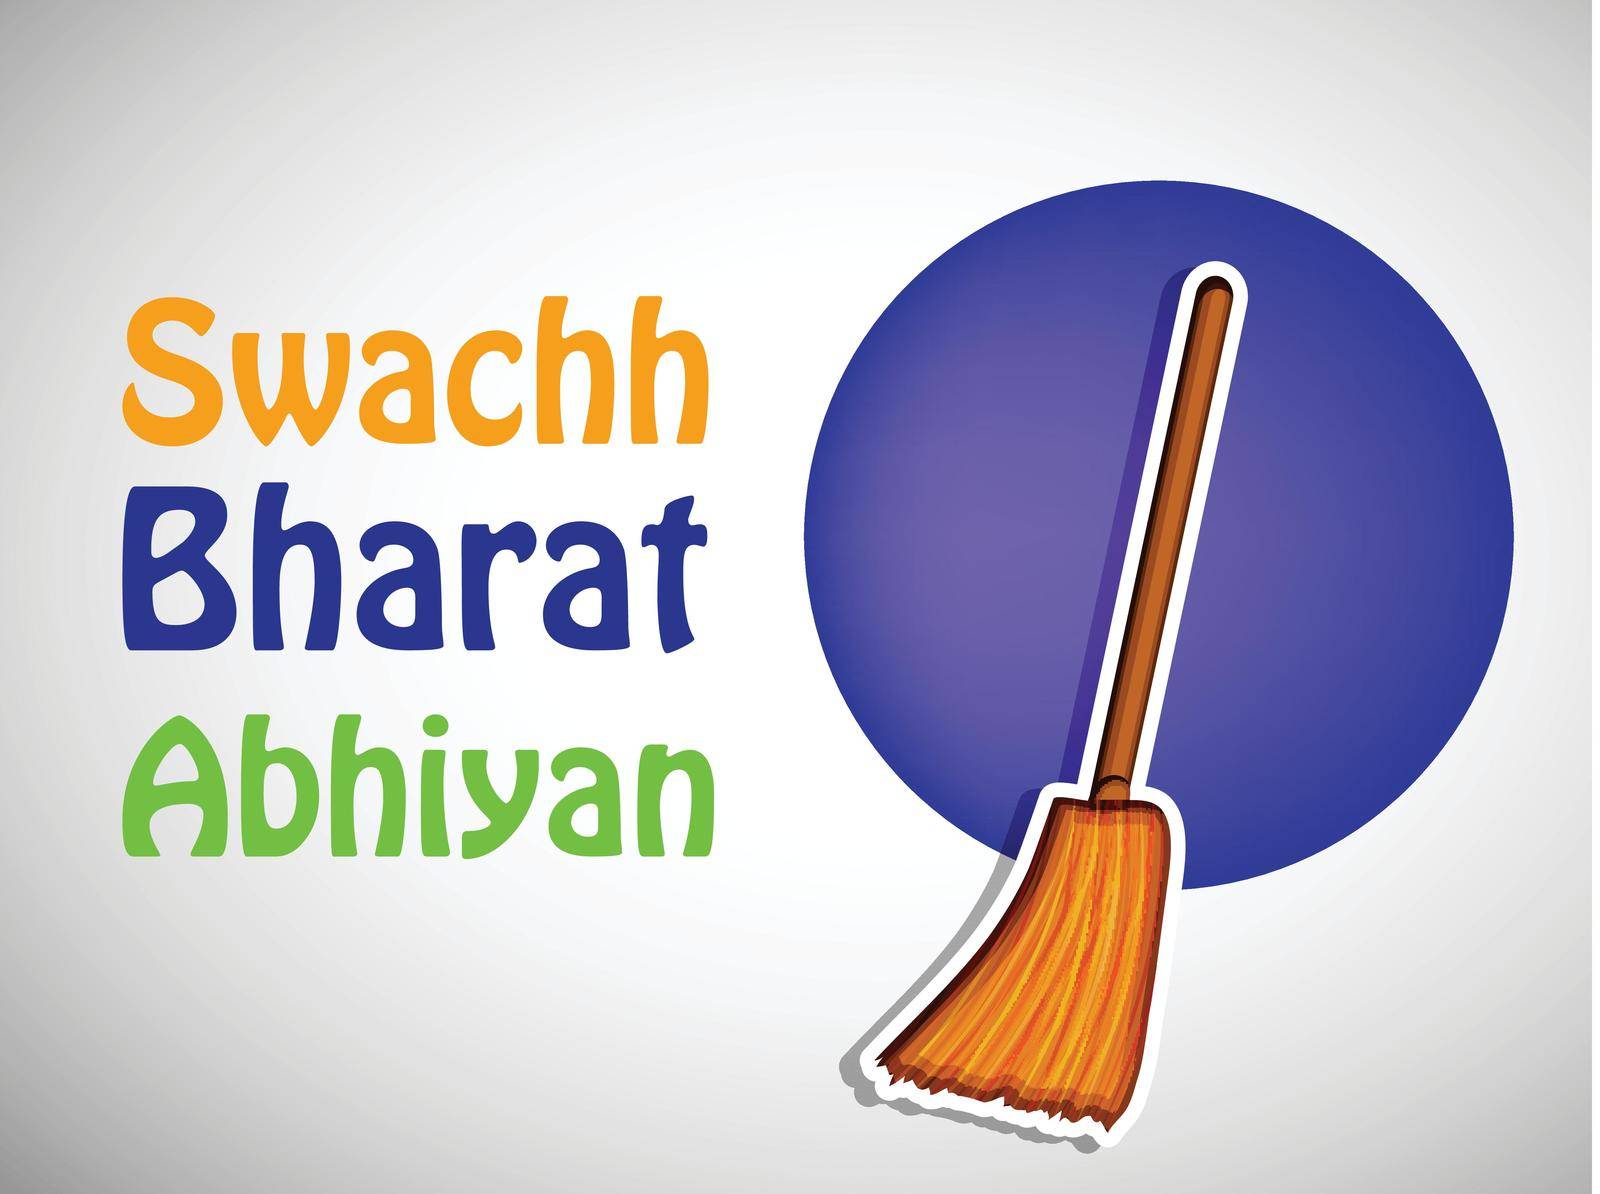 Swachh Bharat Abhiyan or Clean India Mission by vectorworld